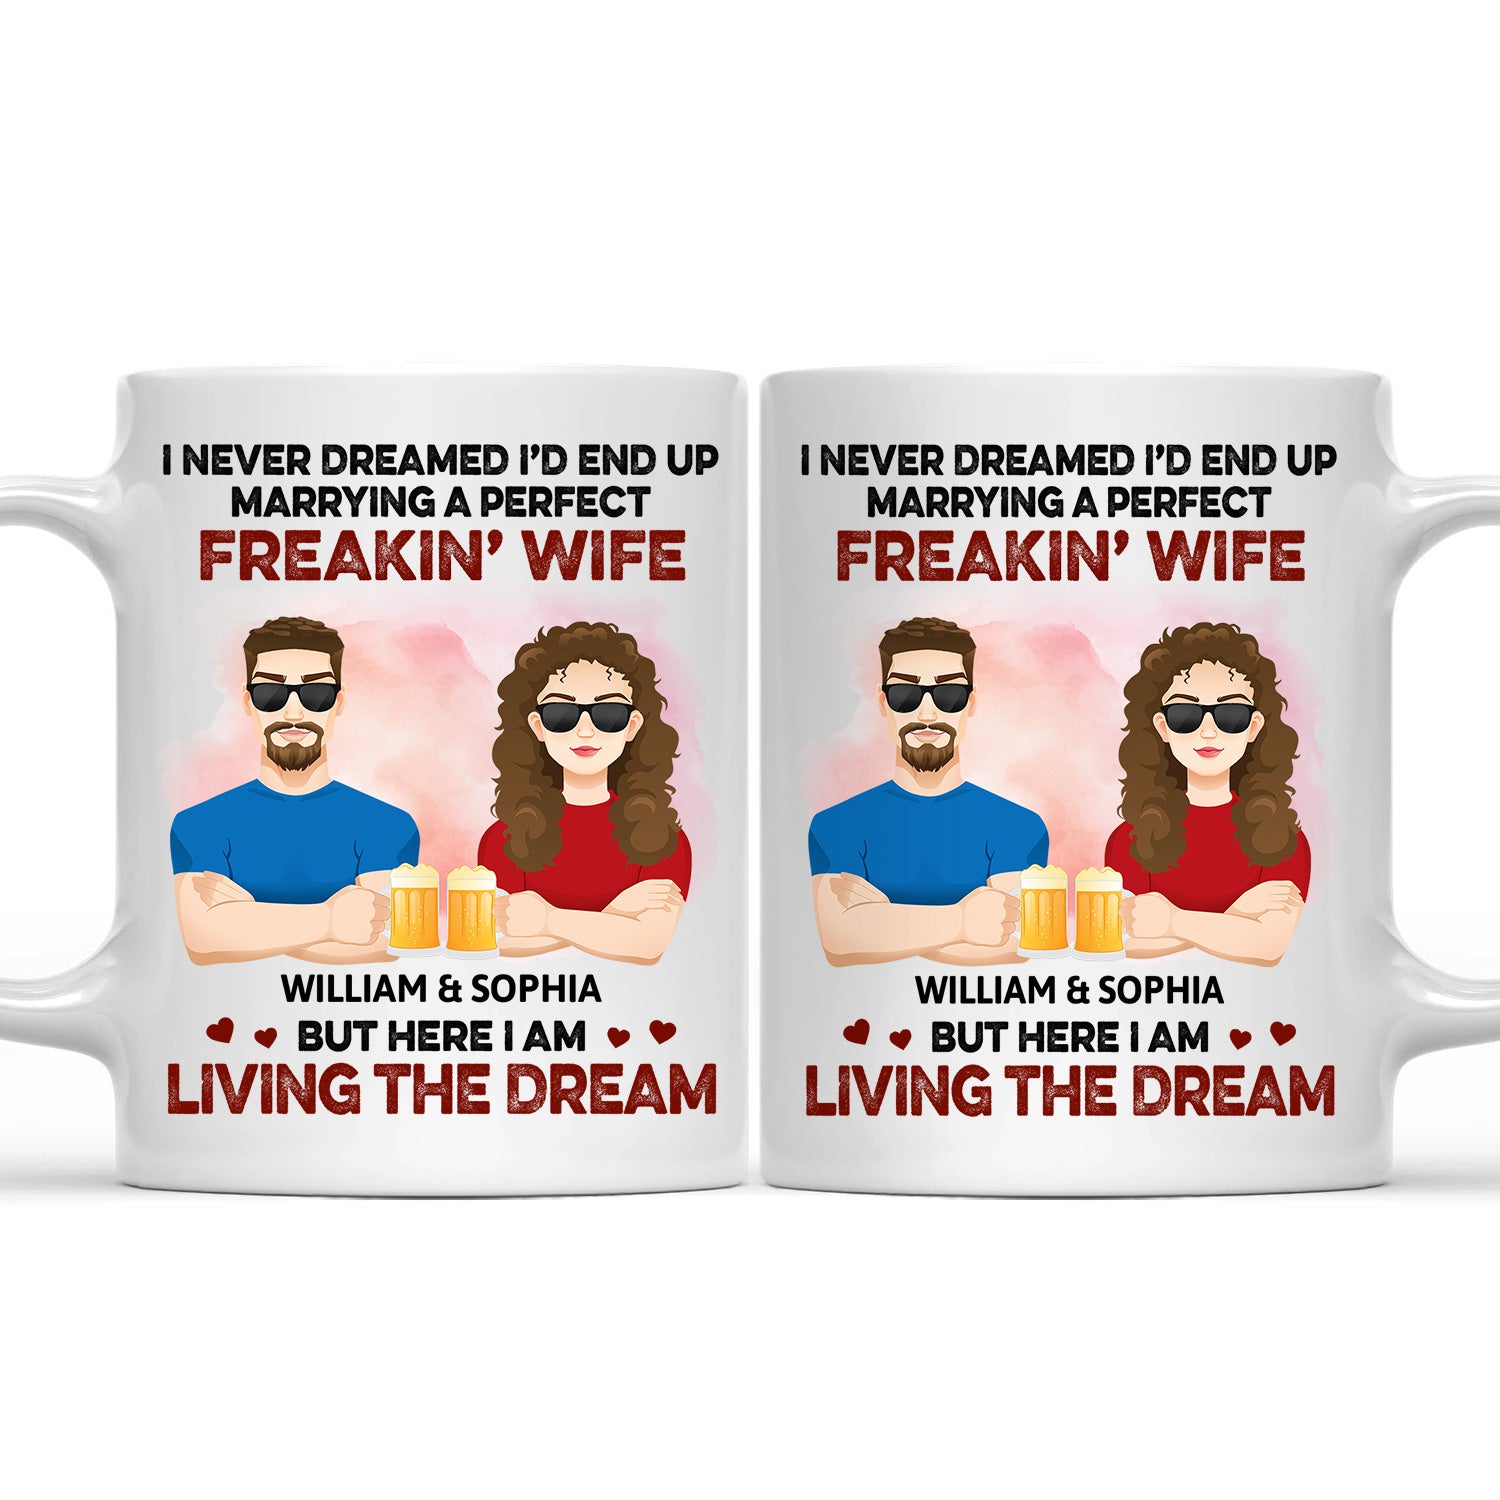 Never Dreamed I'd End Up Marrying A Perfect Freaking Wife Flat Art - Anniversary, Vacation, Funny Gift For Couples, Family - Personalized Mug